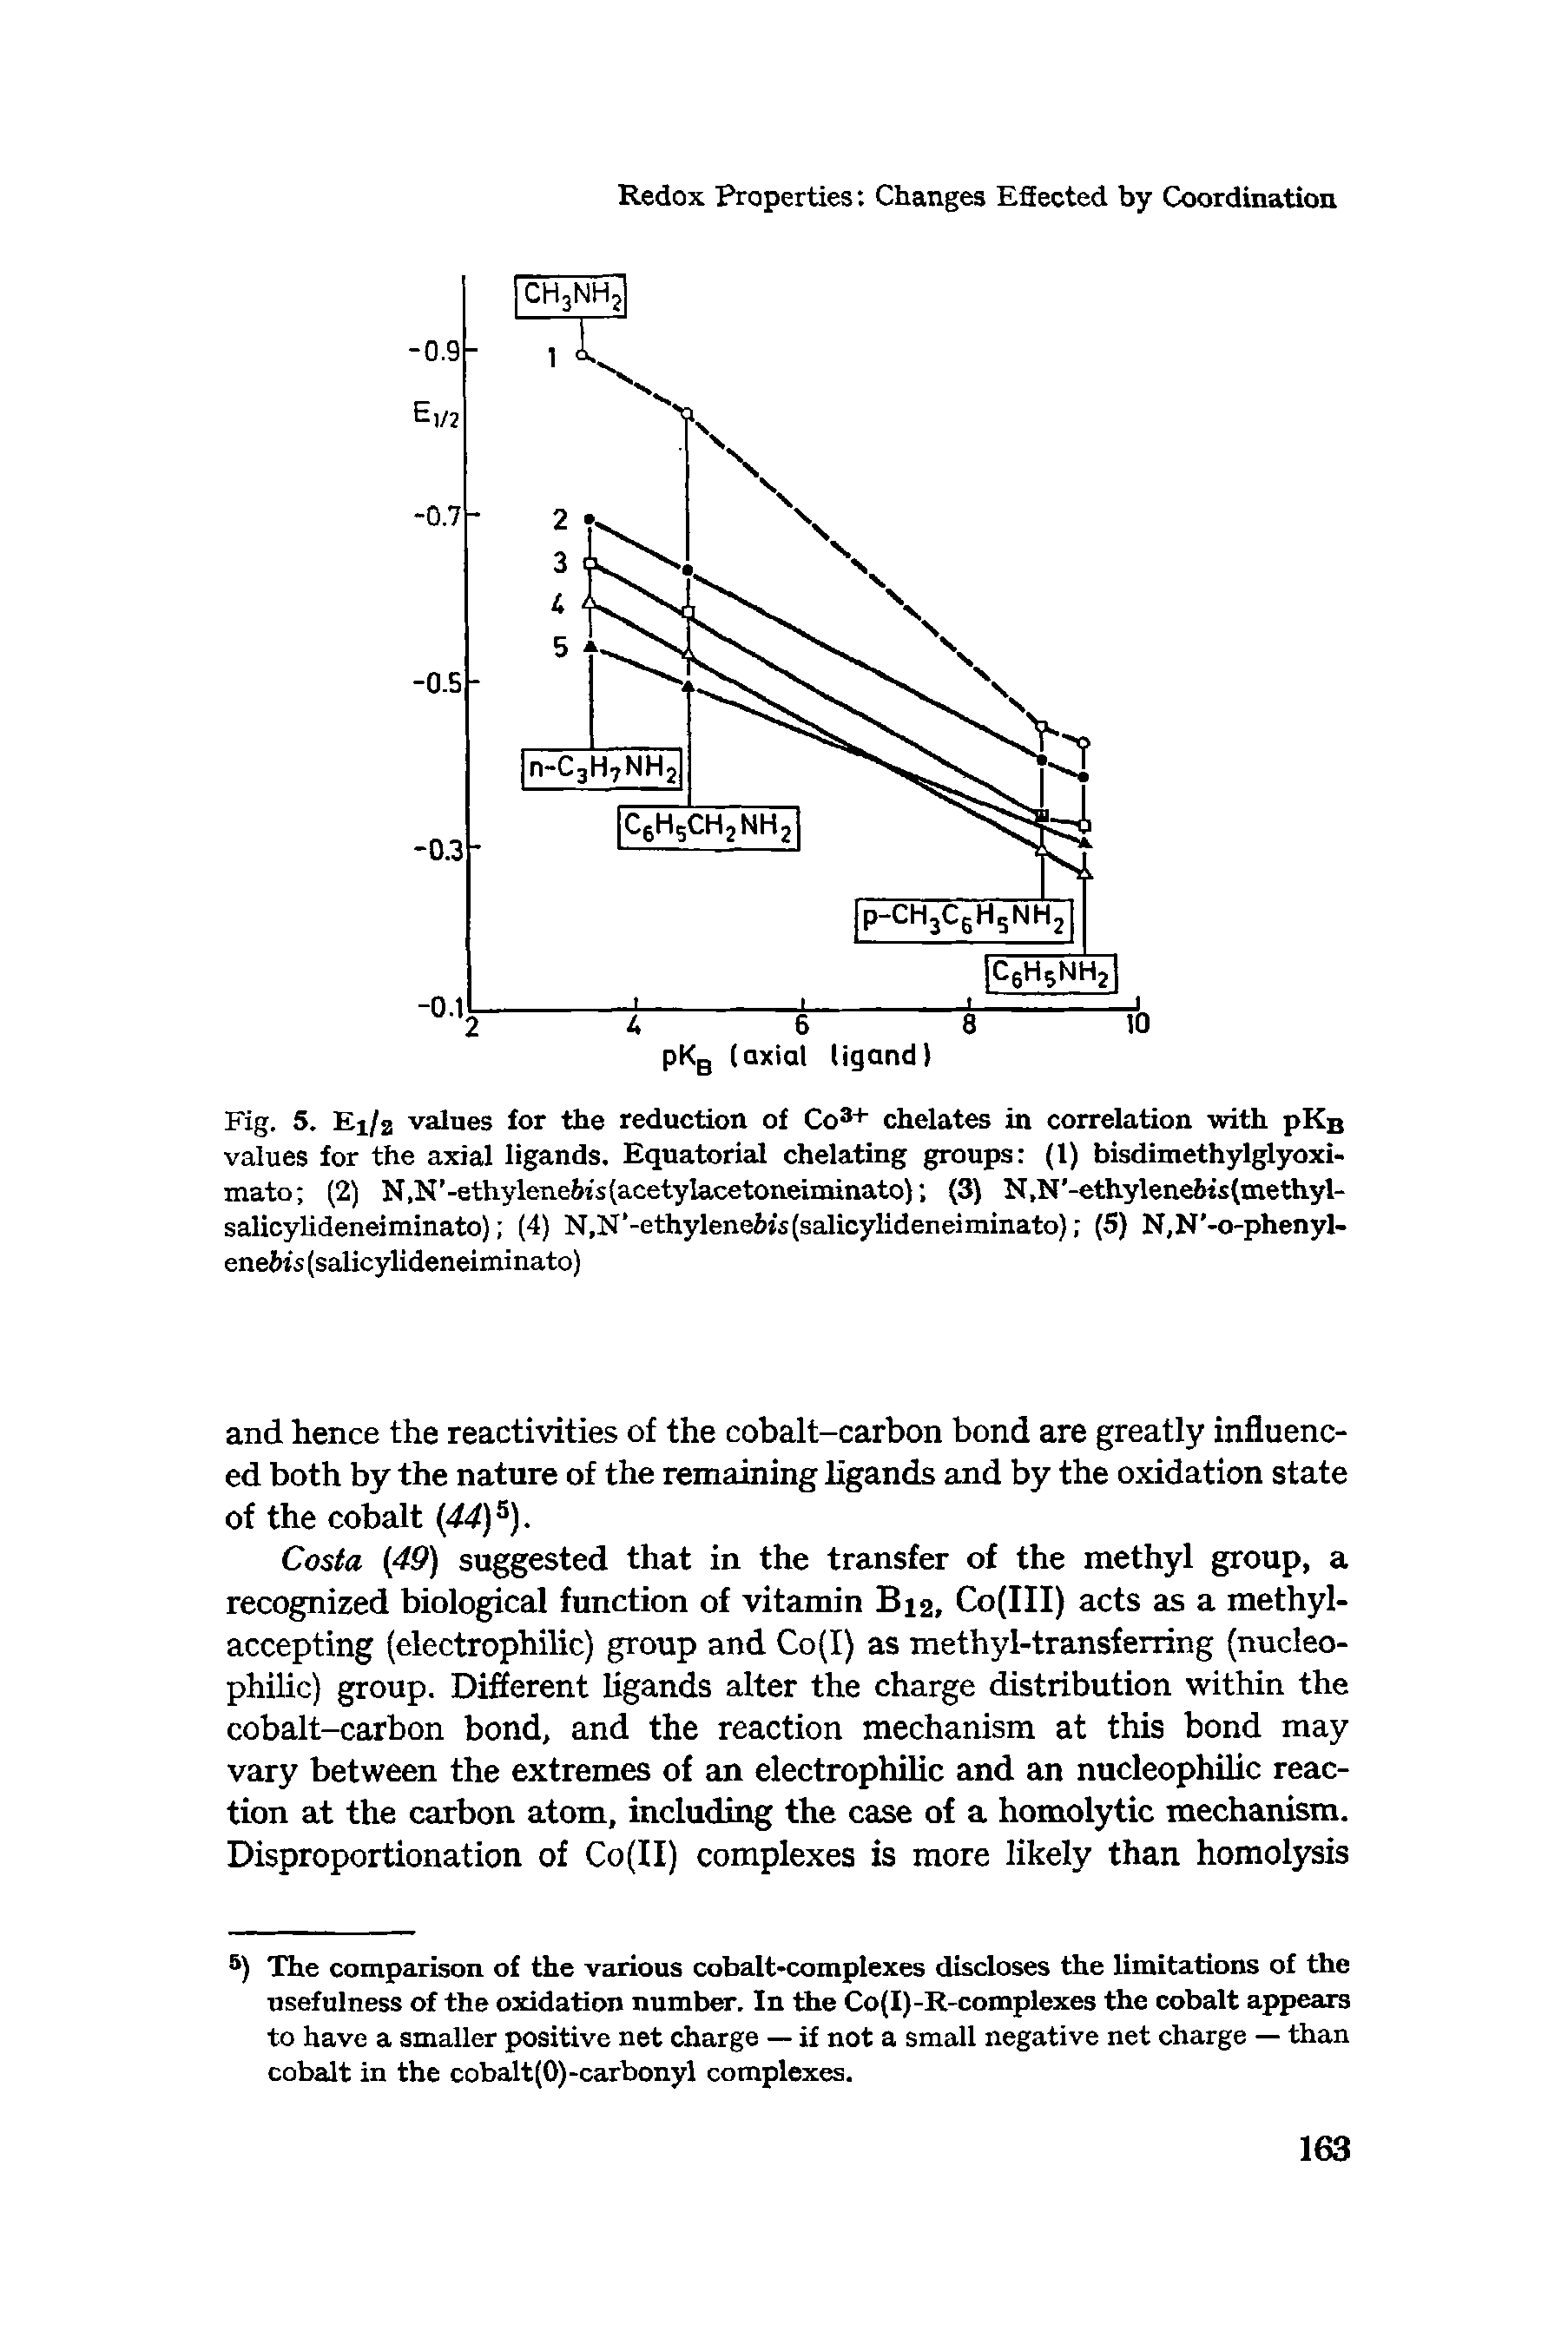 Fig. 5. Ei/a values for the reduction of Co + chelates in correlation with pKn values for the axial ligands. Equatorial chelating groups (1) bisdimethylglyoxi-mato (2) N,N -ethylenefeis(acetylacetoneiminato) (3) N,N -ethylene6is(methyl-salicylideneiminato) (4) N,N -ethylene6/s(salicylideneiminato) (5) N,N -o-phenyl-eneWs (salicylideneiminato)...